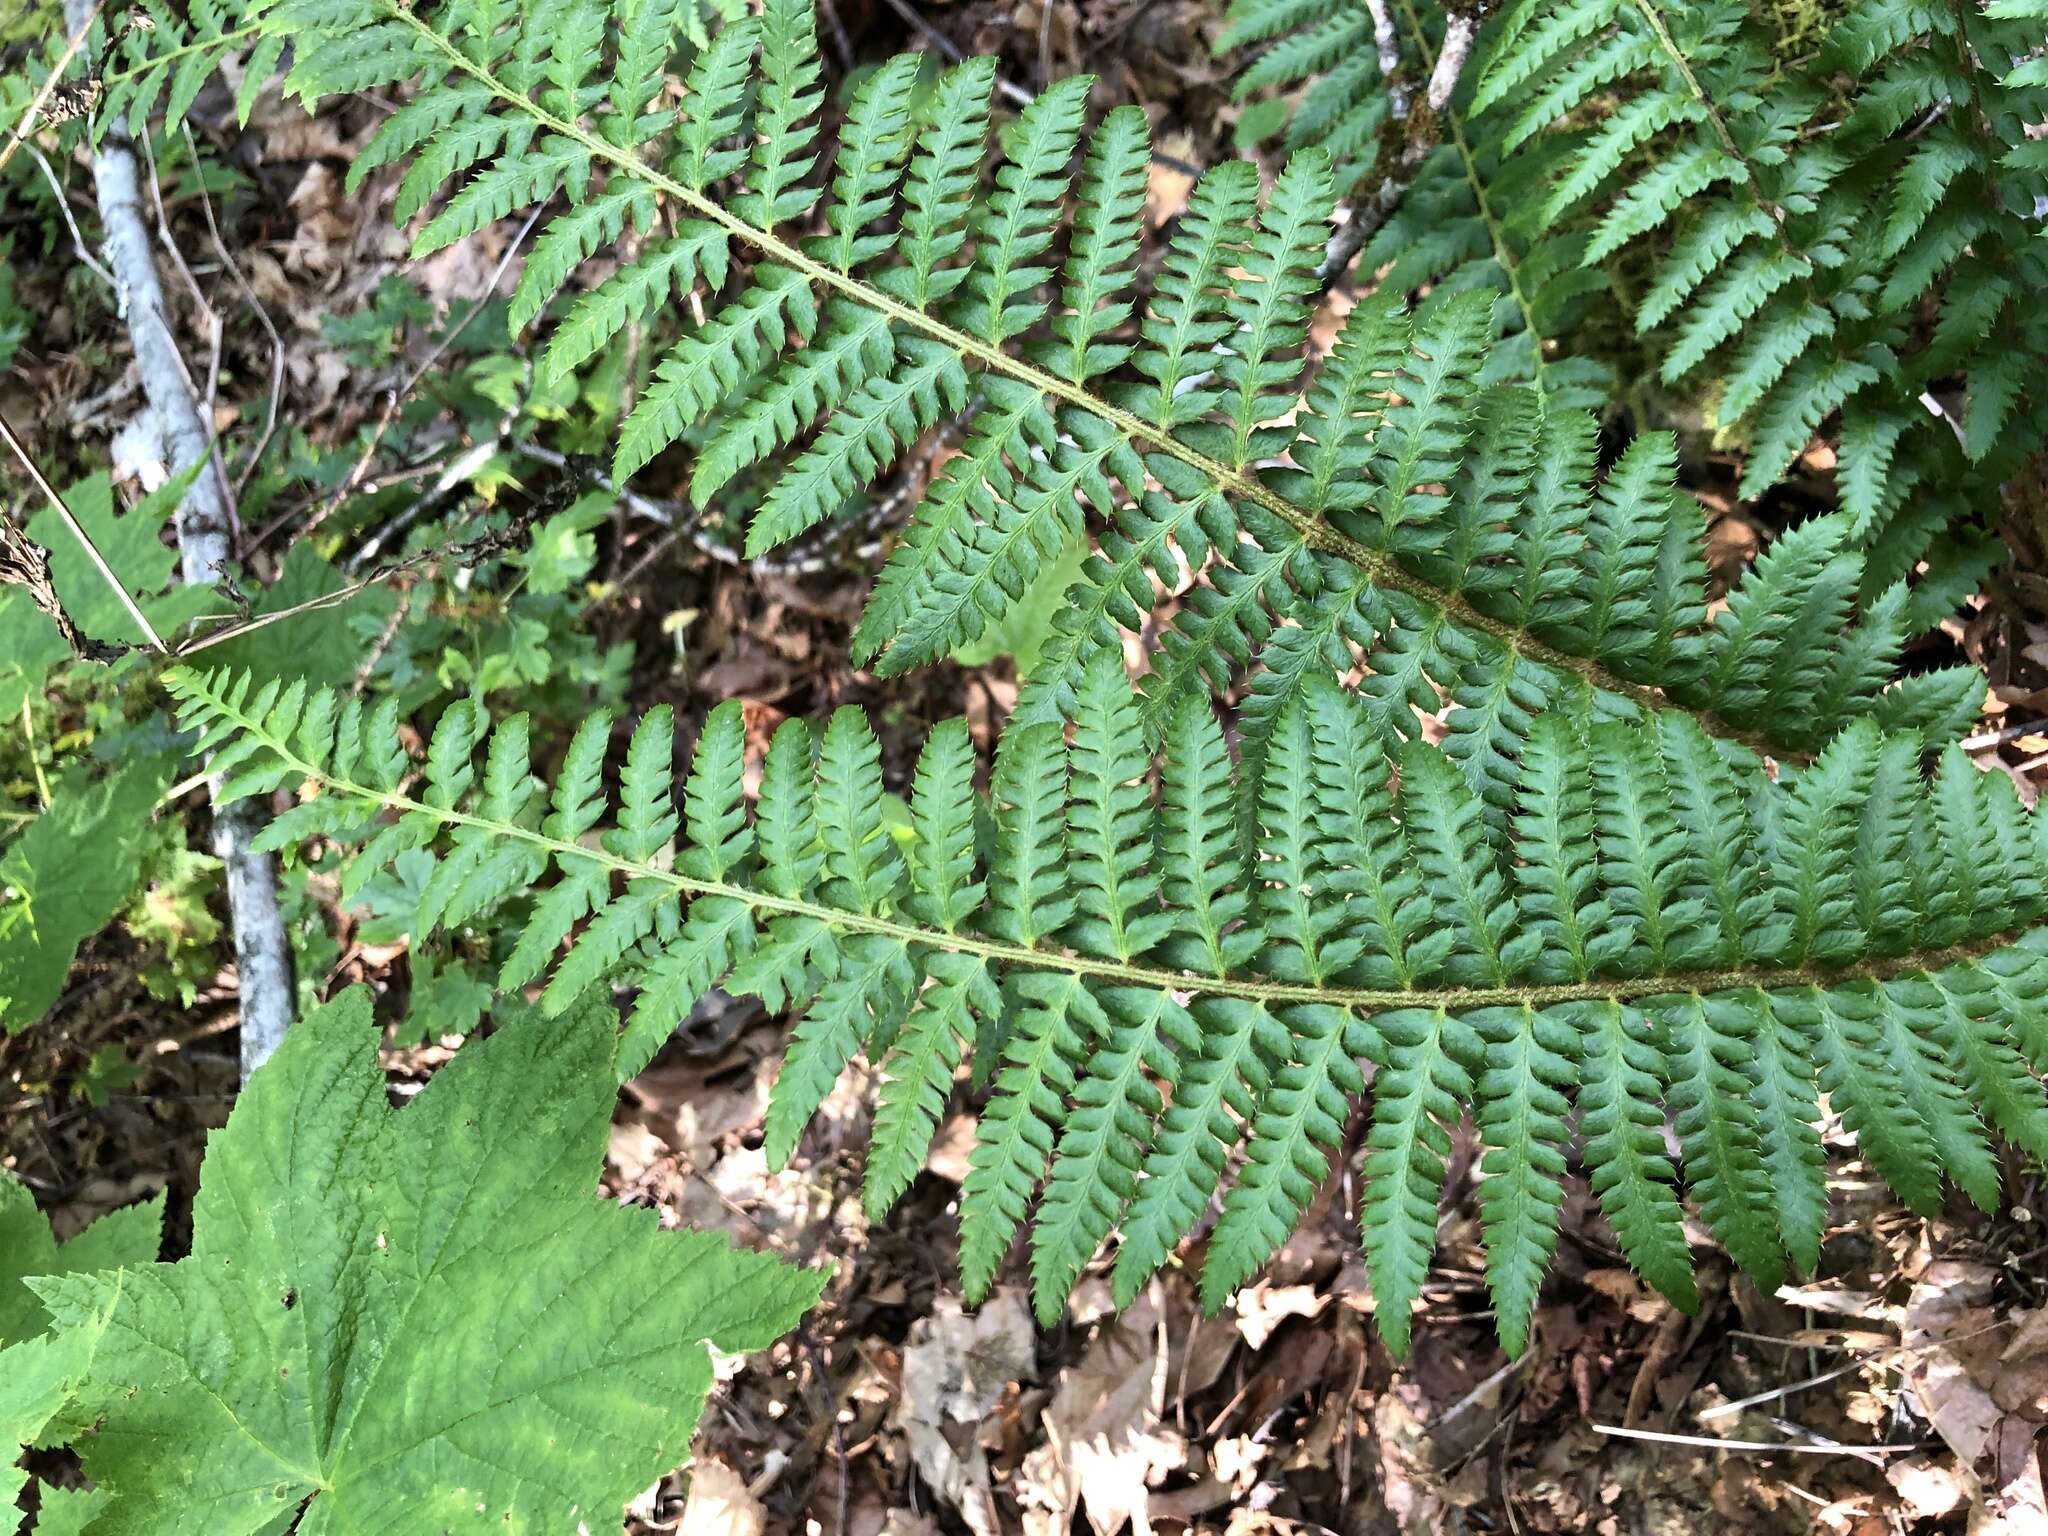 Image of Anderson's hollyfern